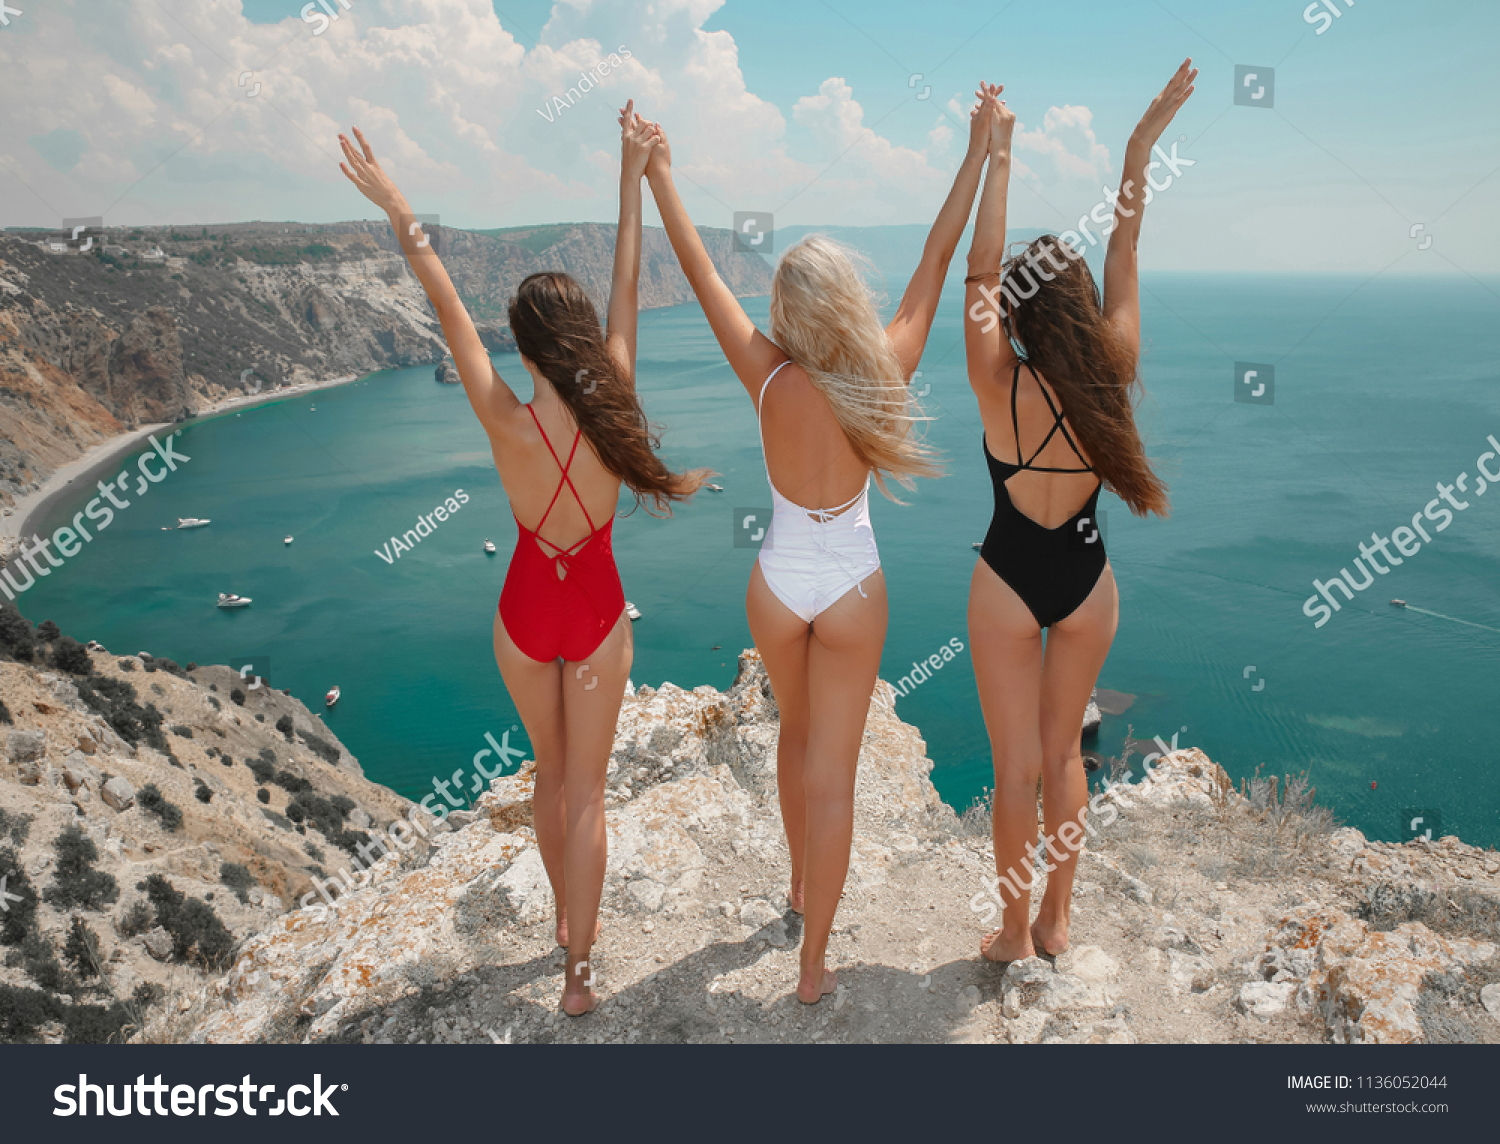 Free three bestgirlfriends with open arms. Fashion women bikini clothes set. Beautiful traveller girl friends having fun in trendy outfit on cliff mountains enjoying lagoon bay. Summertime vacation. #1136052044